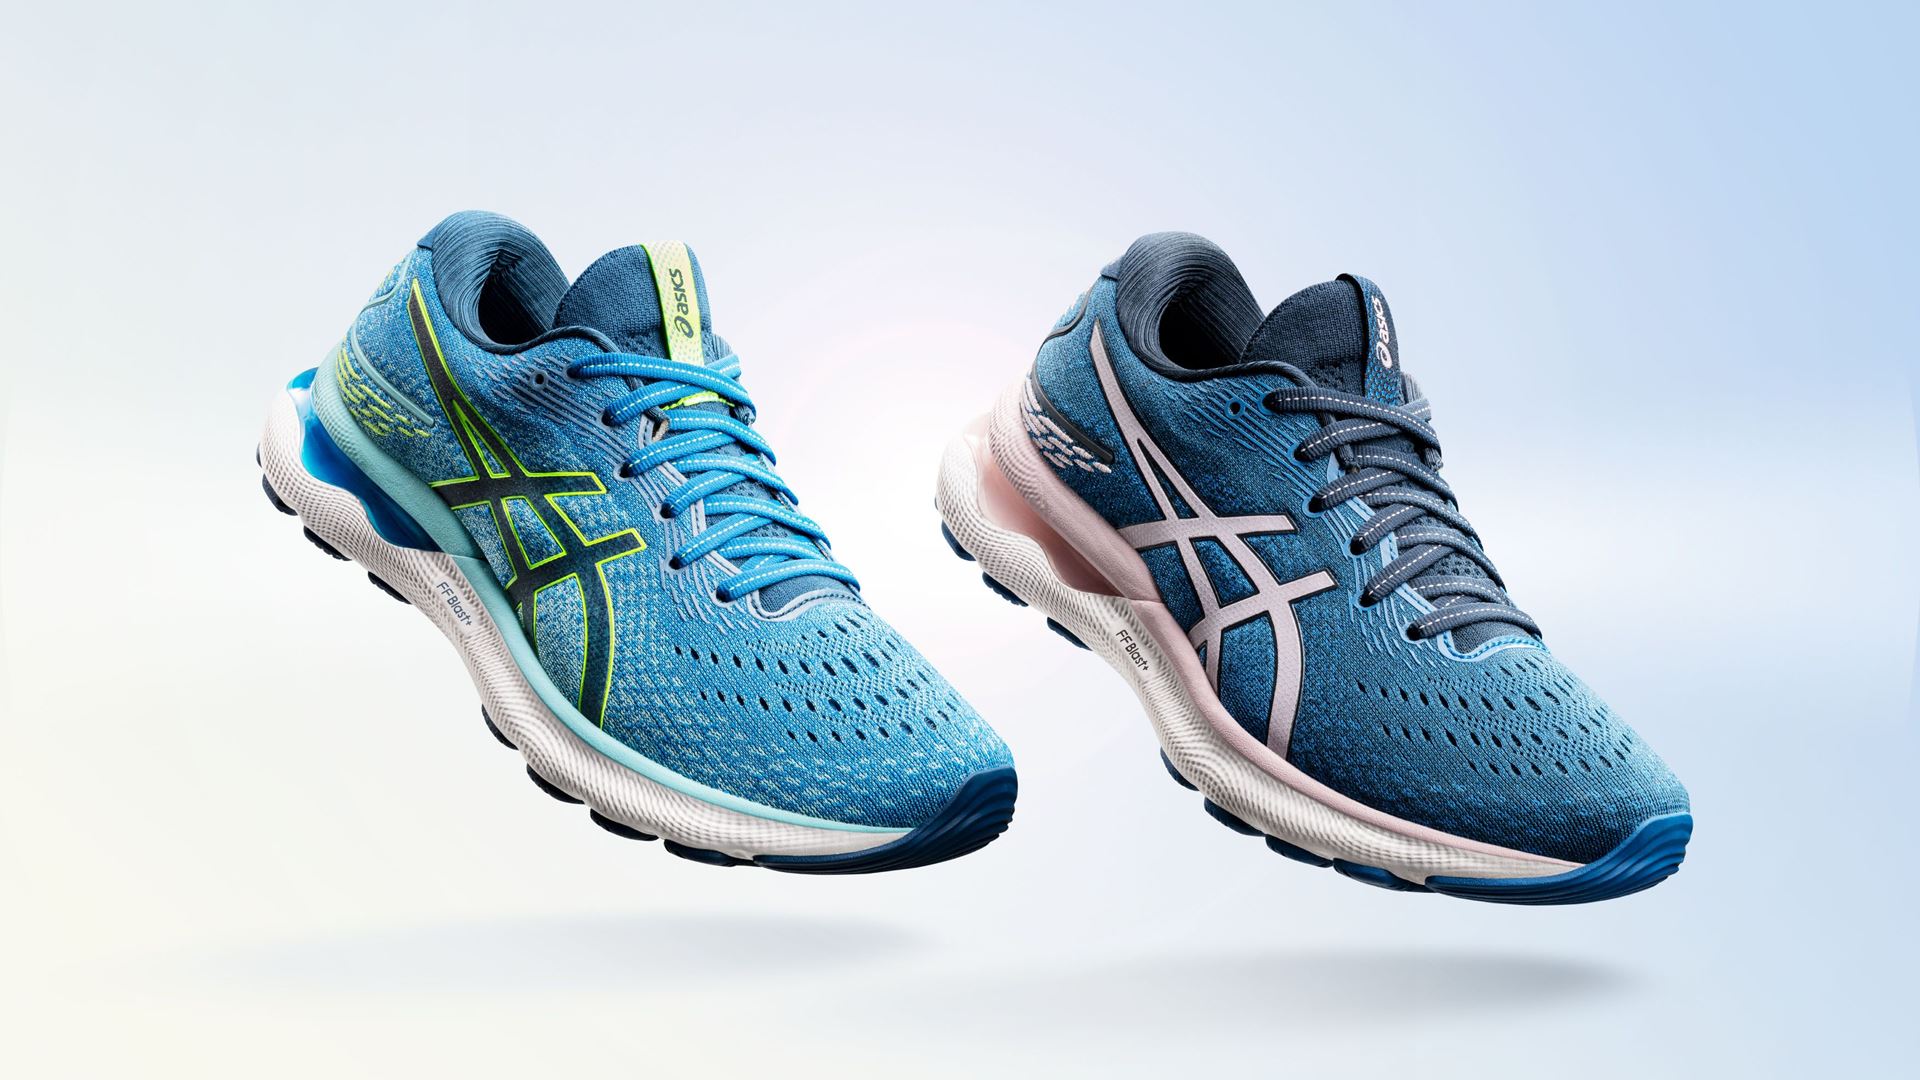 ASICS launches the GEL-NIMBUS™ 24 running shoe, delivering advanced impact protection through new ASICS technology